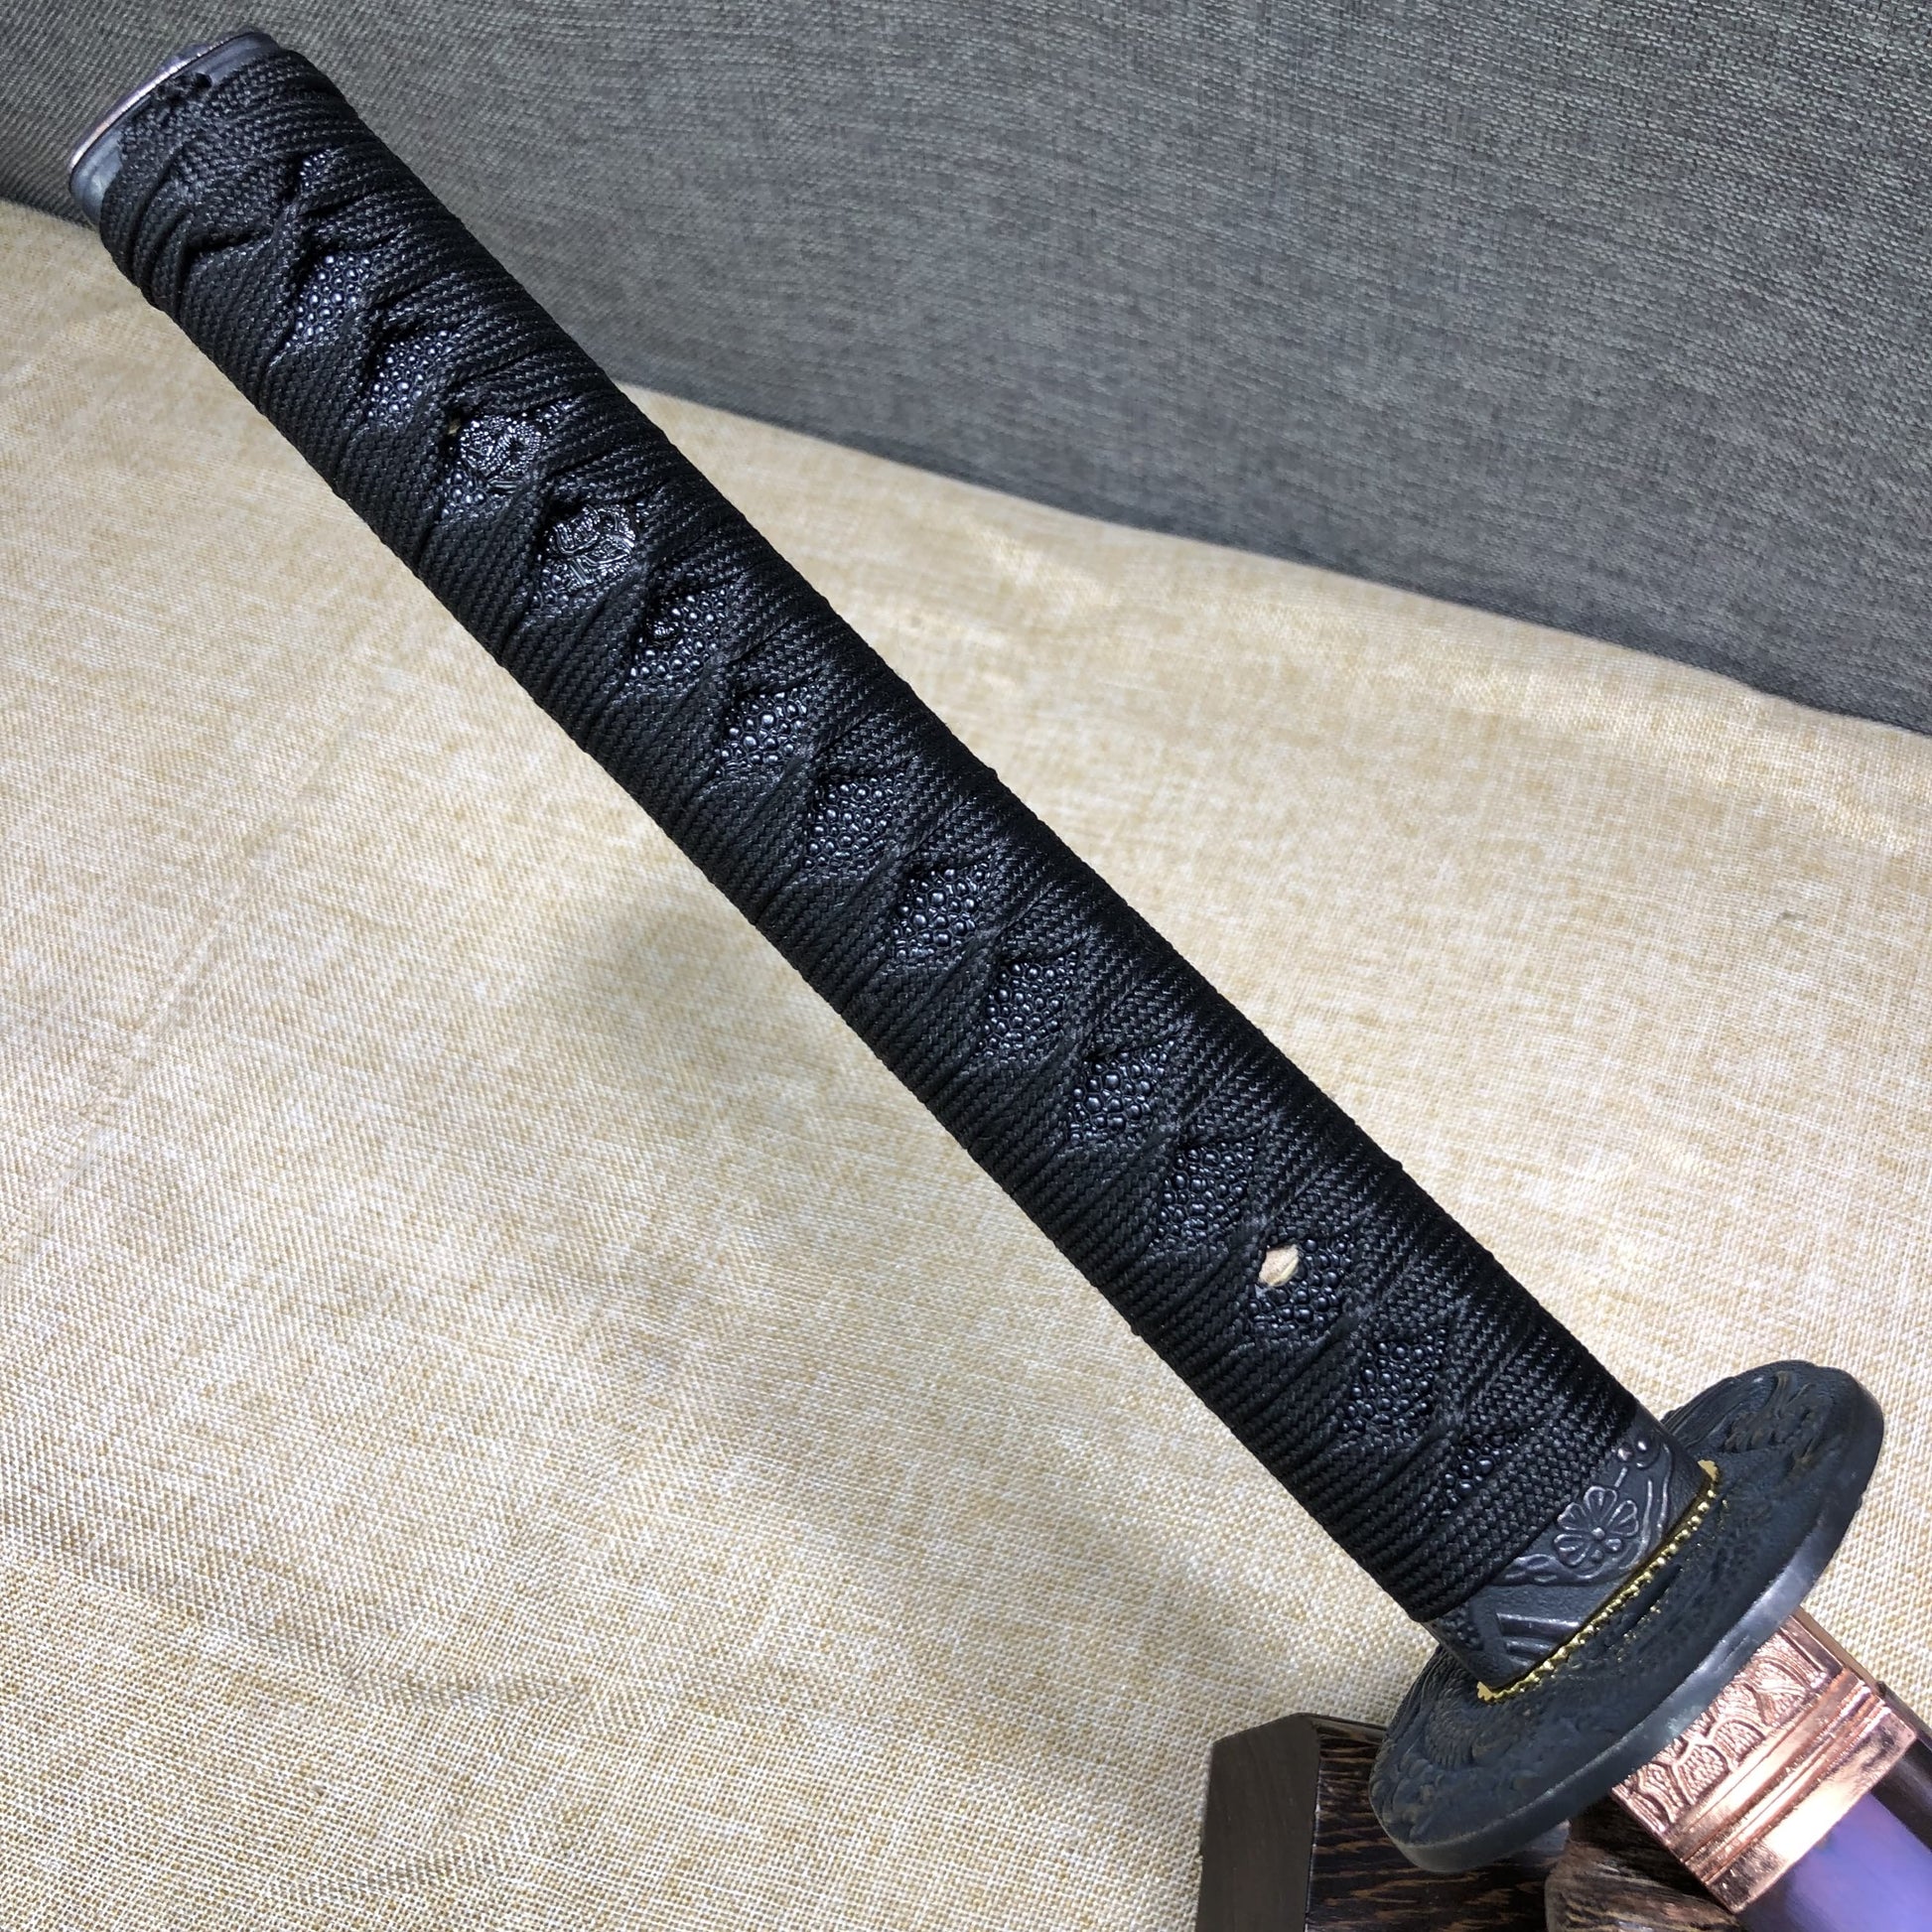 Purple Katana,High carbon steel blade,Leather scabbard,Full tang - Chinese sword shop